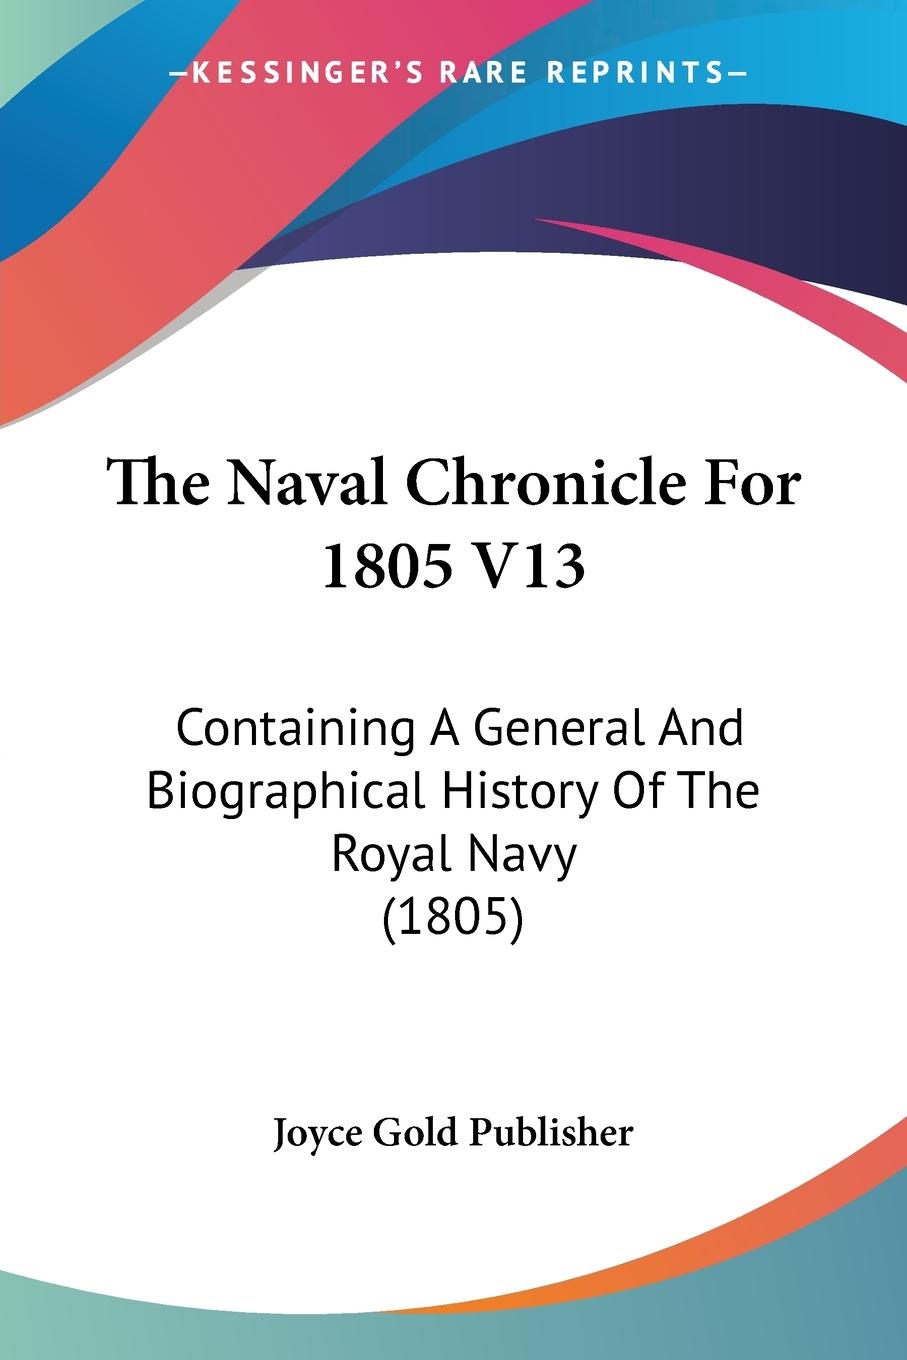 The Naval Chronicle For 1805 V13 - Joyce Gold Publisher